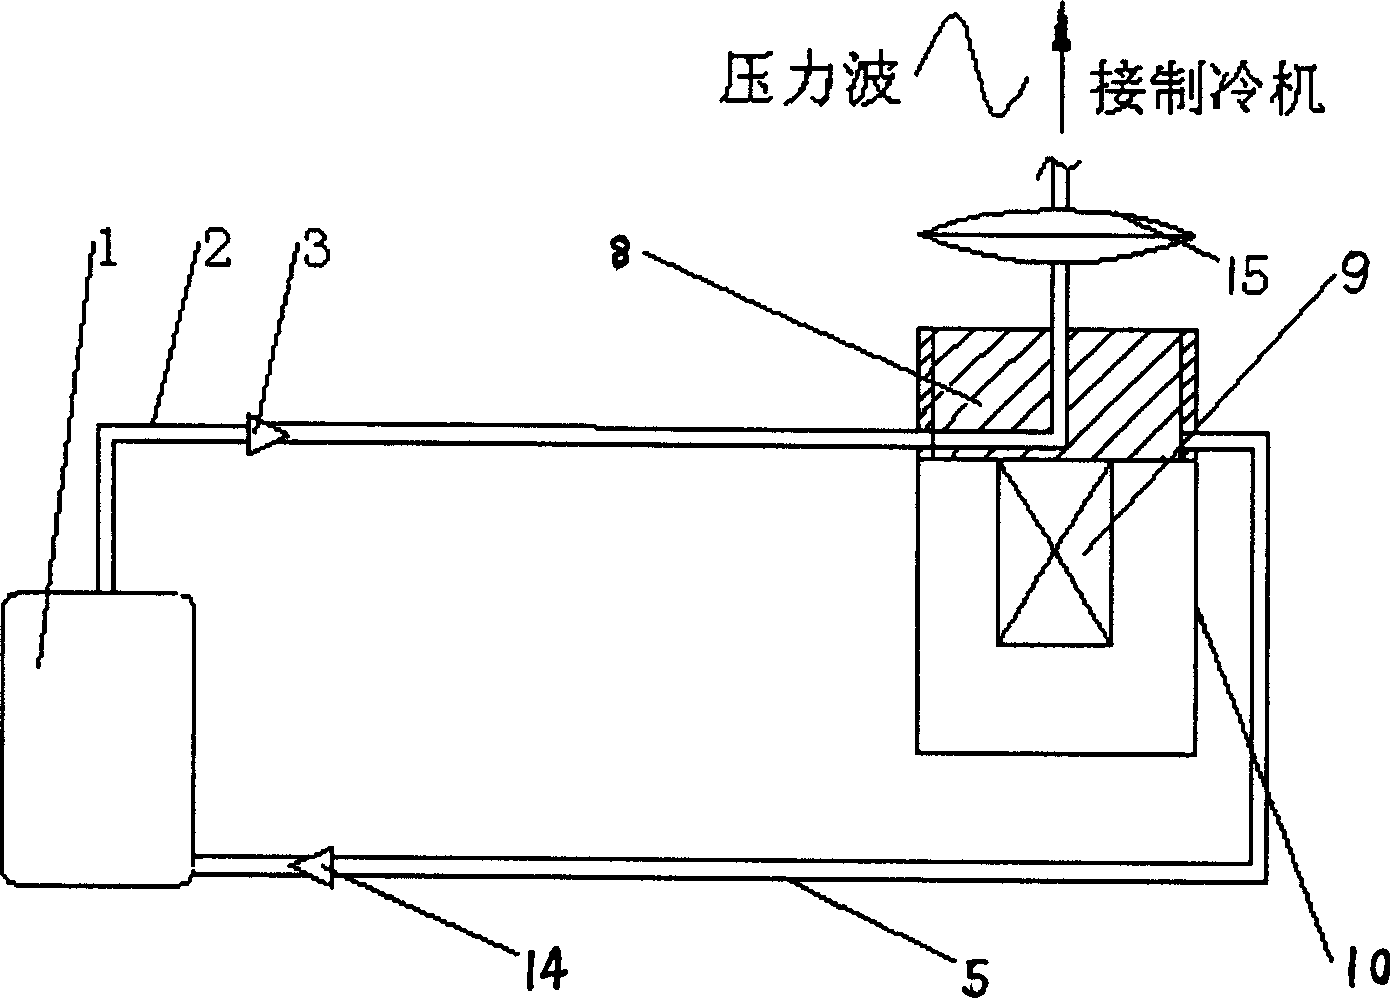 Compression wave generation system of cooling machine with compressor of constant oil lubricating flow